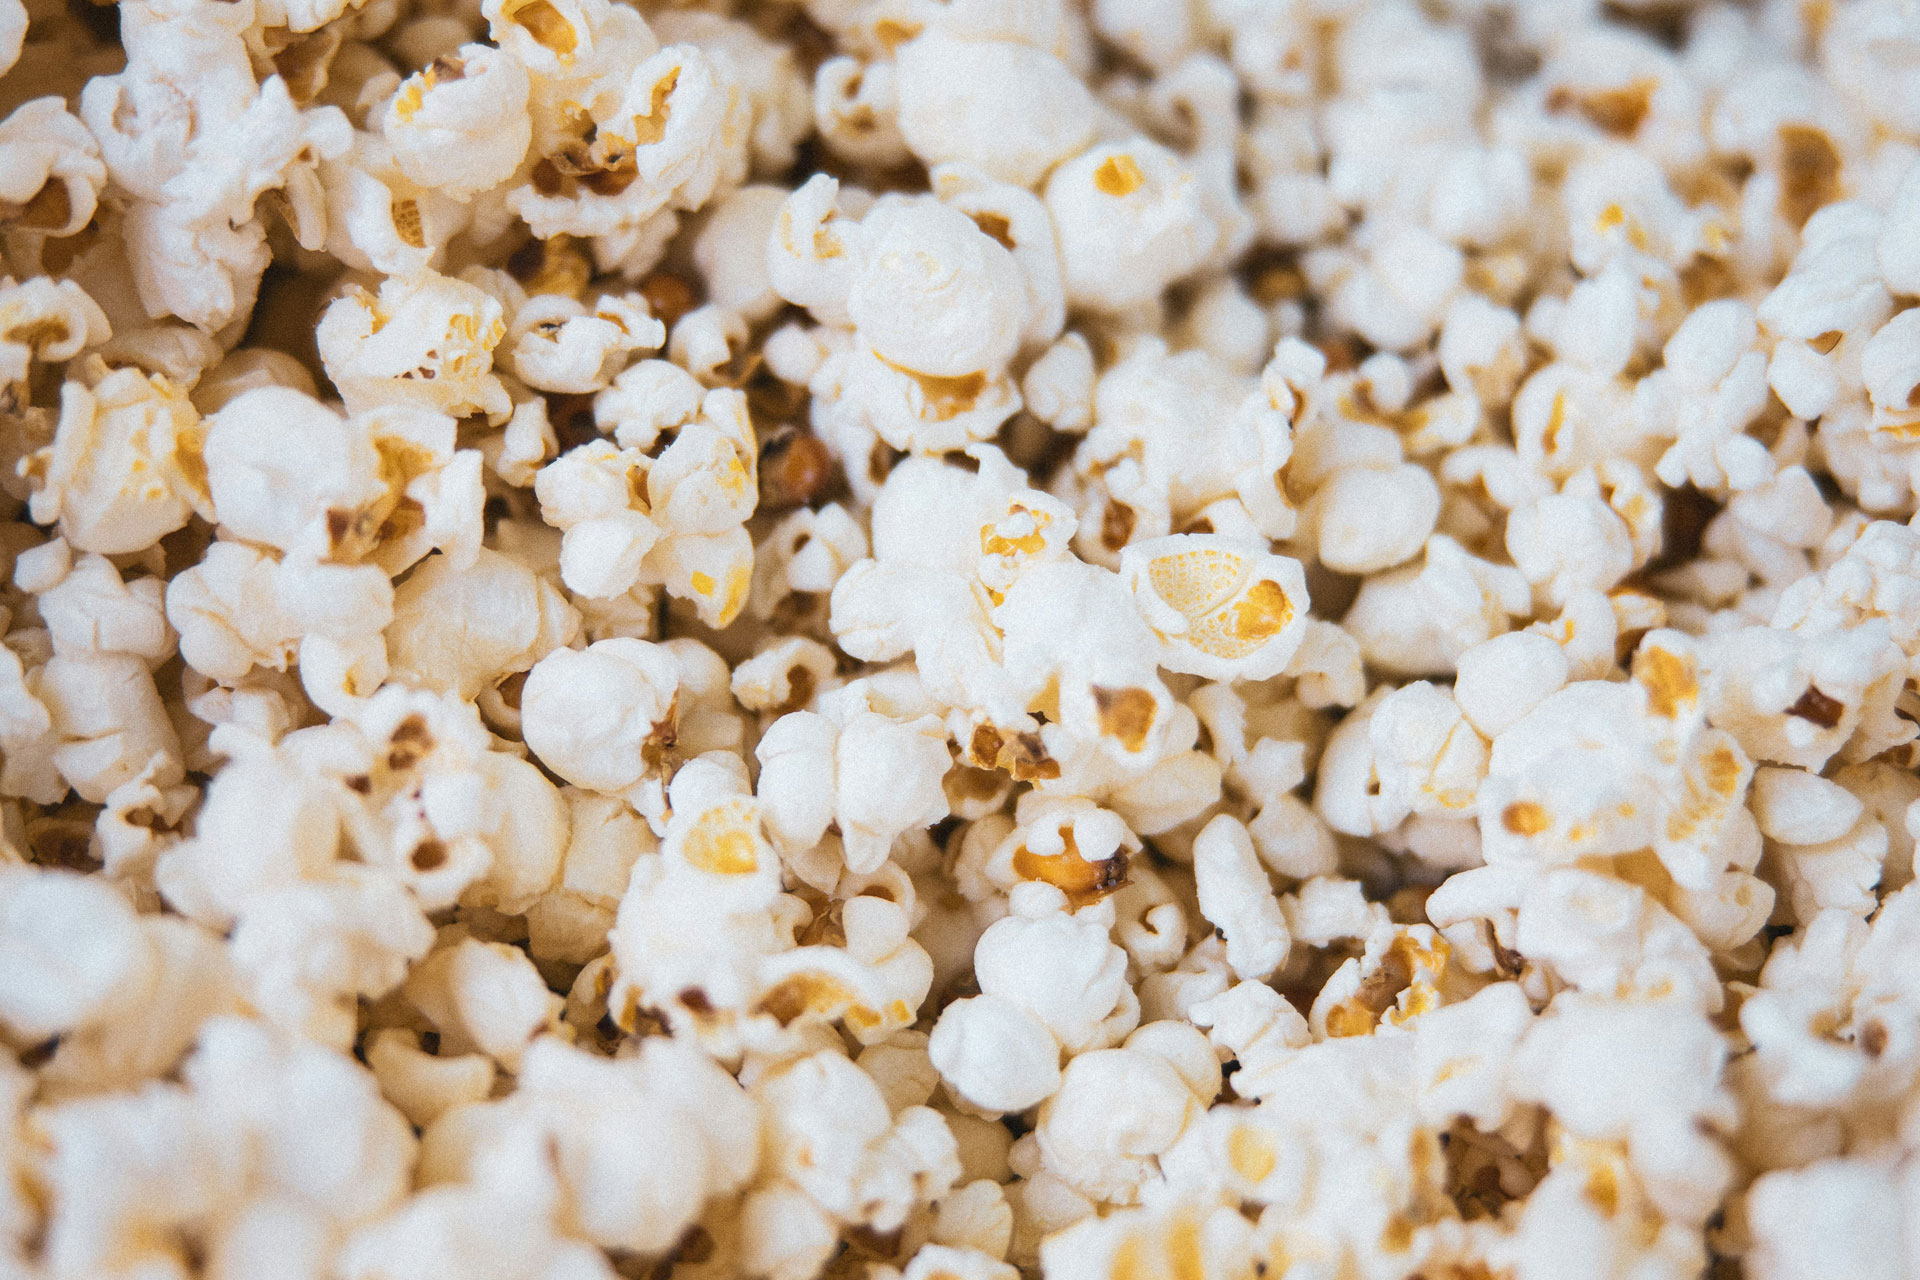 Popcorn Brain: Has Social Media Wrecked Our Attention Spans?